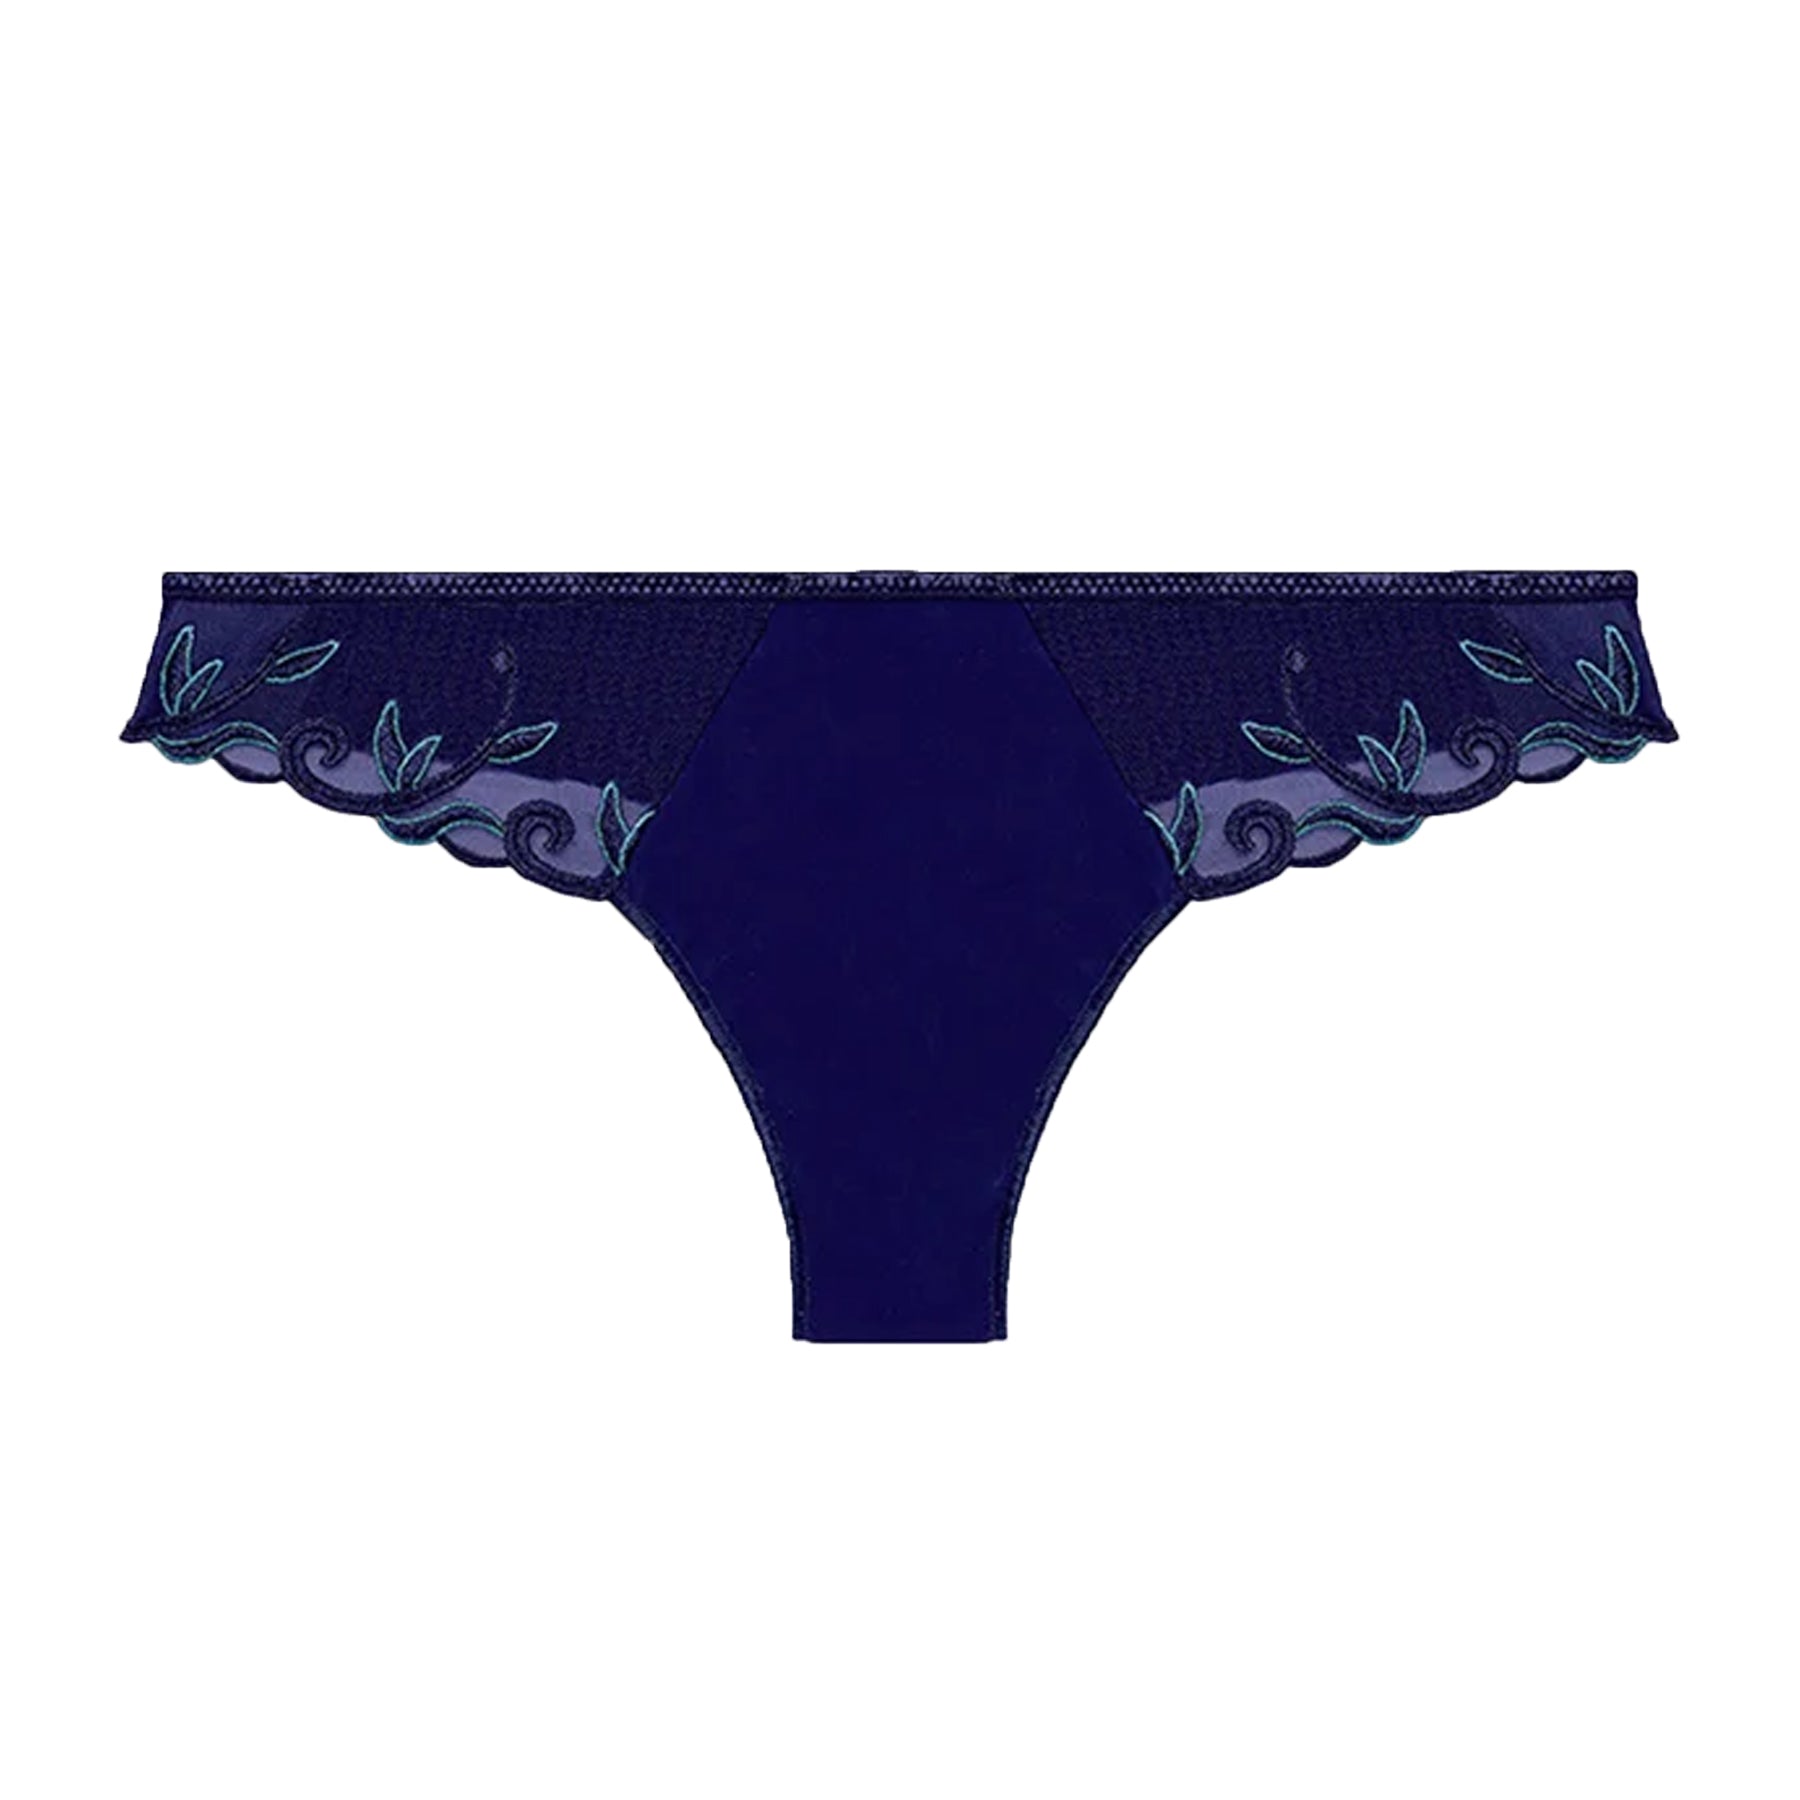 Buy Now-Yamamay Gear Printed Satin Lace Hipster Panty